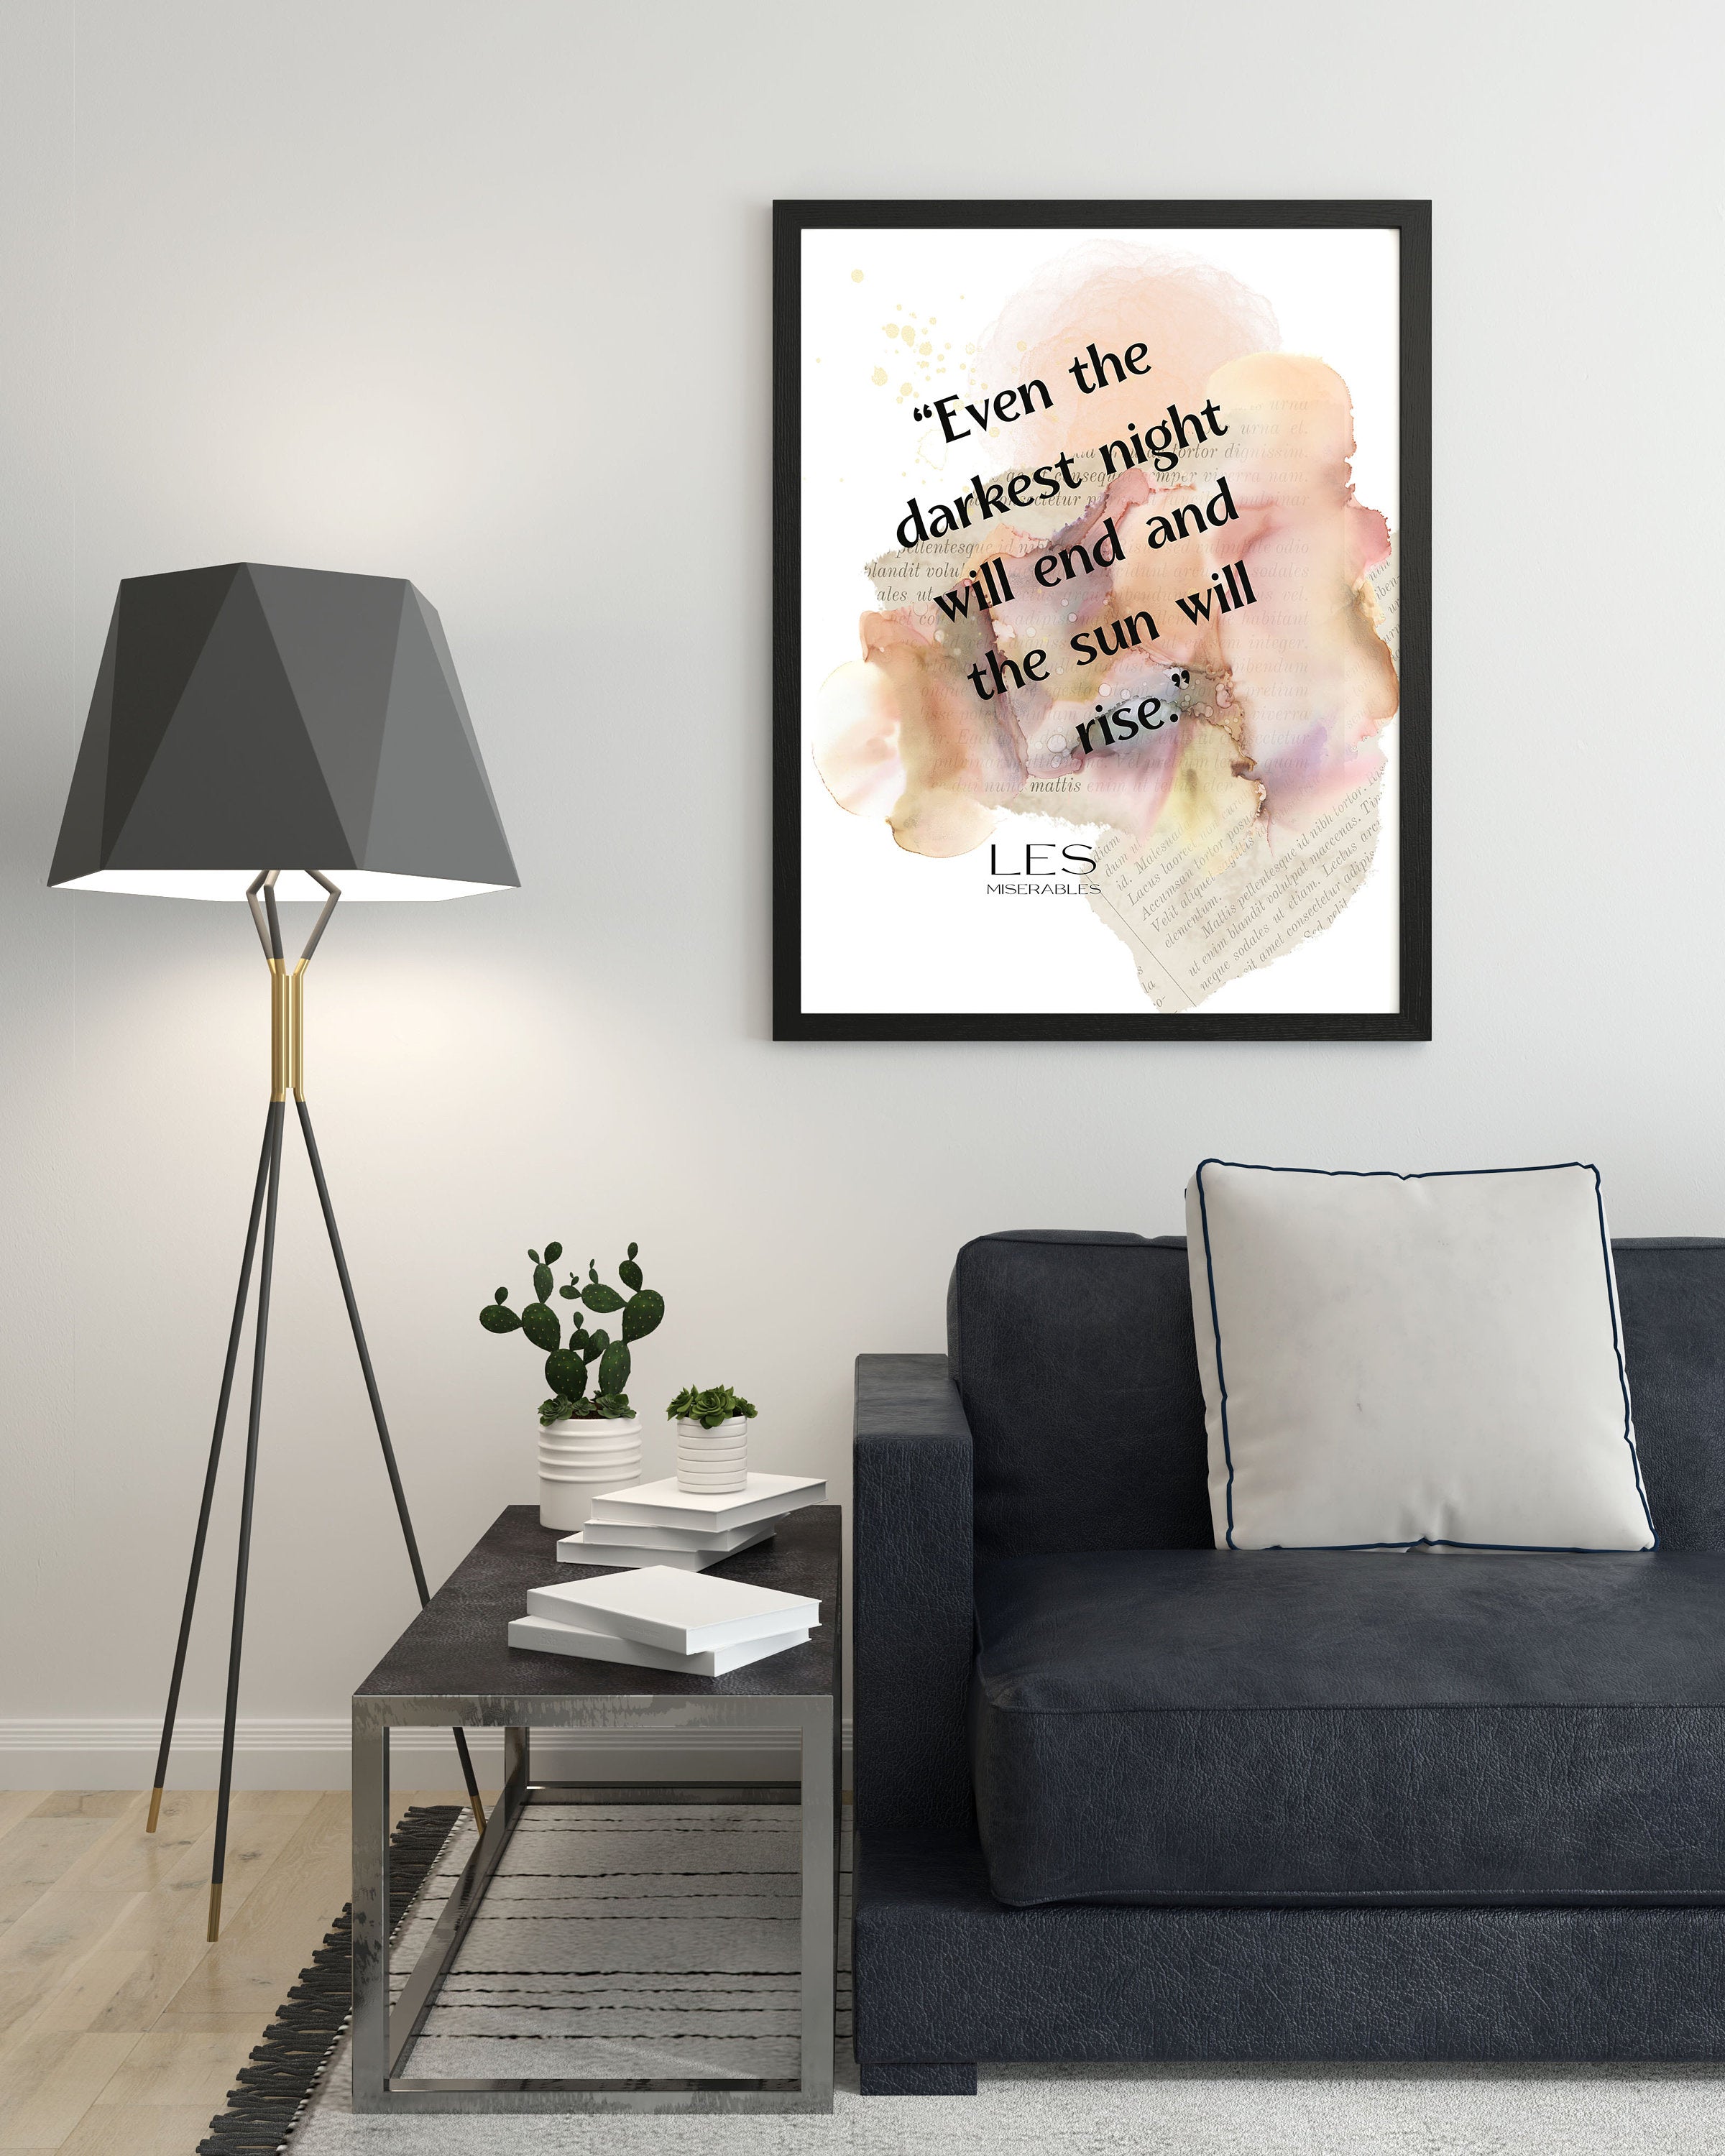 Les Miserable Quote Print Even The Darkest Night Will End, Victor Hugo Inspirational Quote Wall Art Prints Framed or Unframed